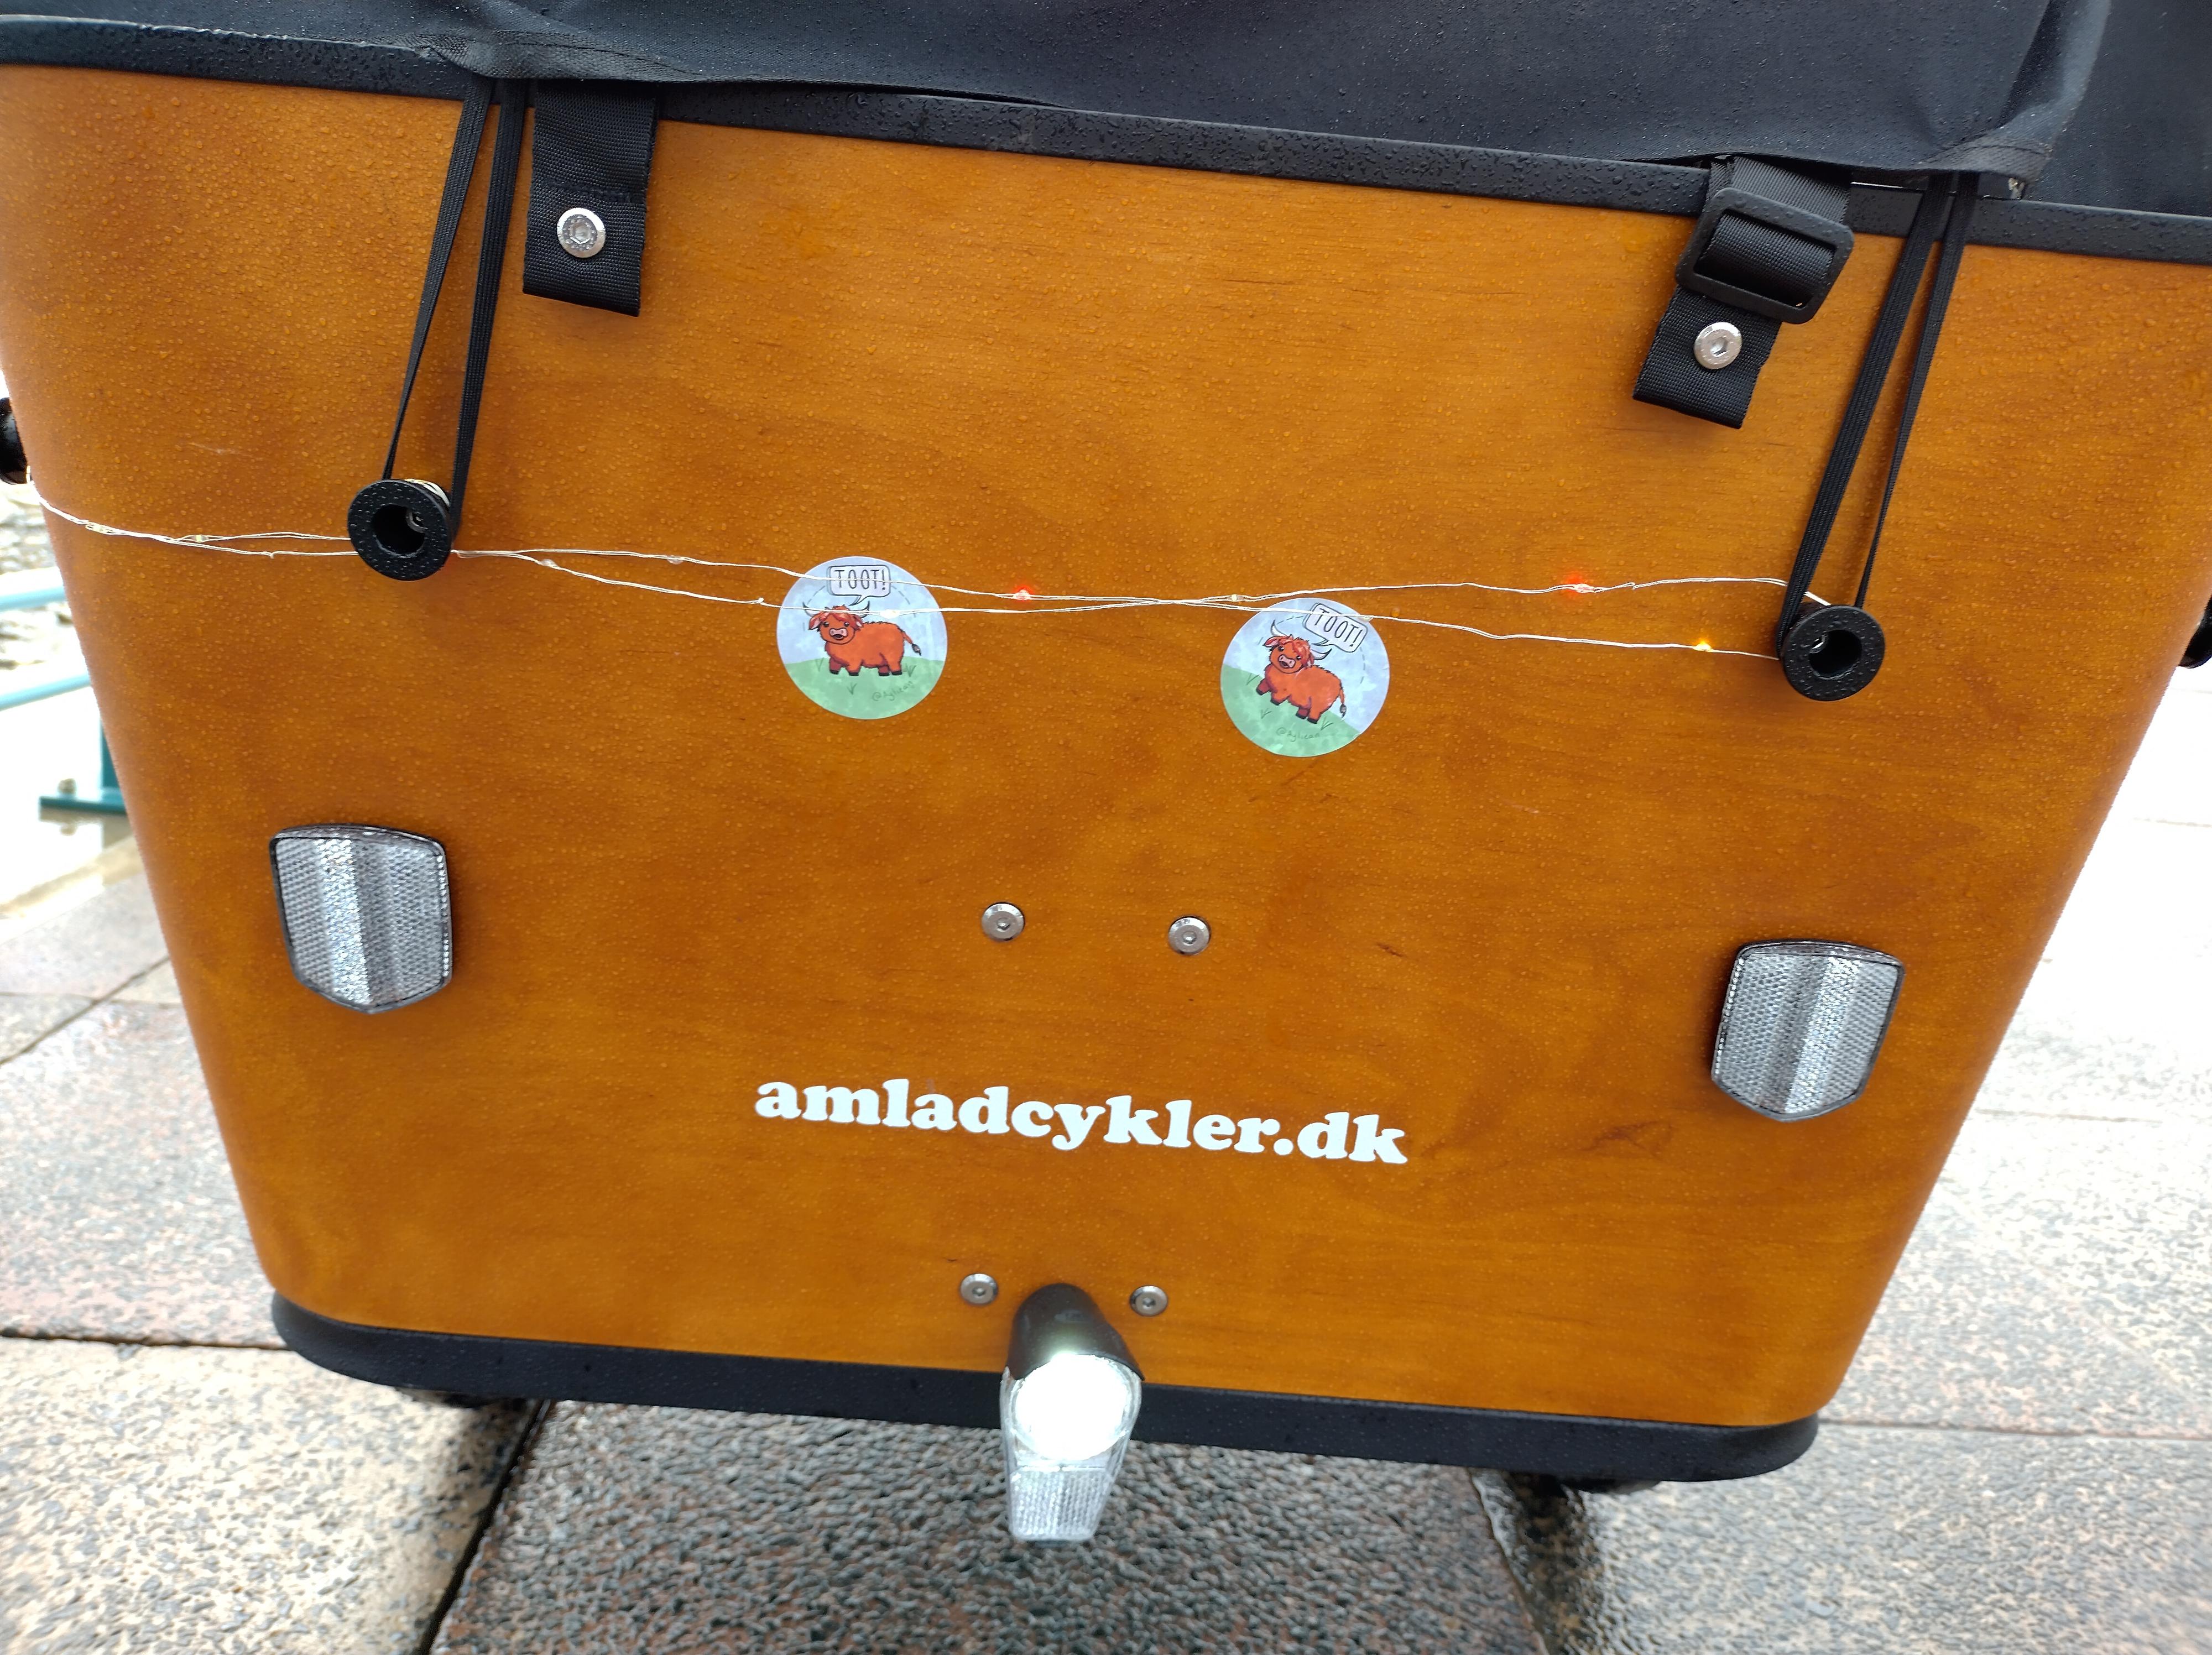 The front of the bucket. Two circular stickers above a white amladcykler.dk logo. There are two reflectors on the outer edges. The front light is under the logo.